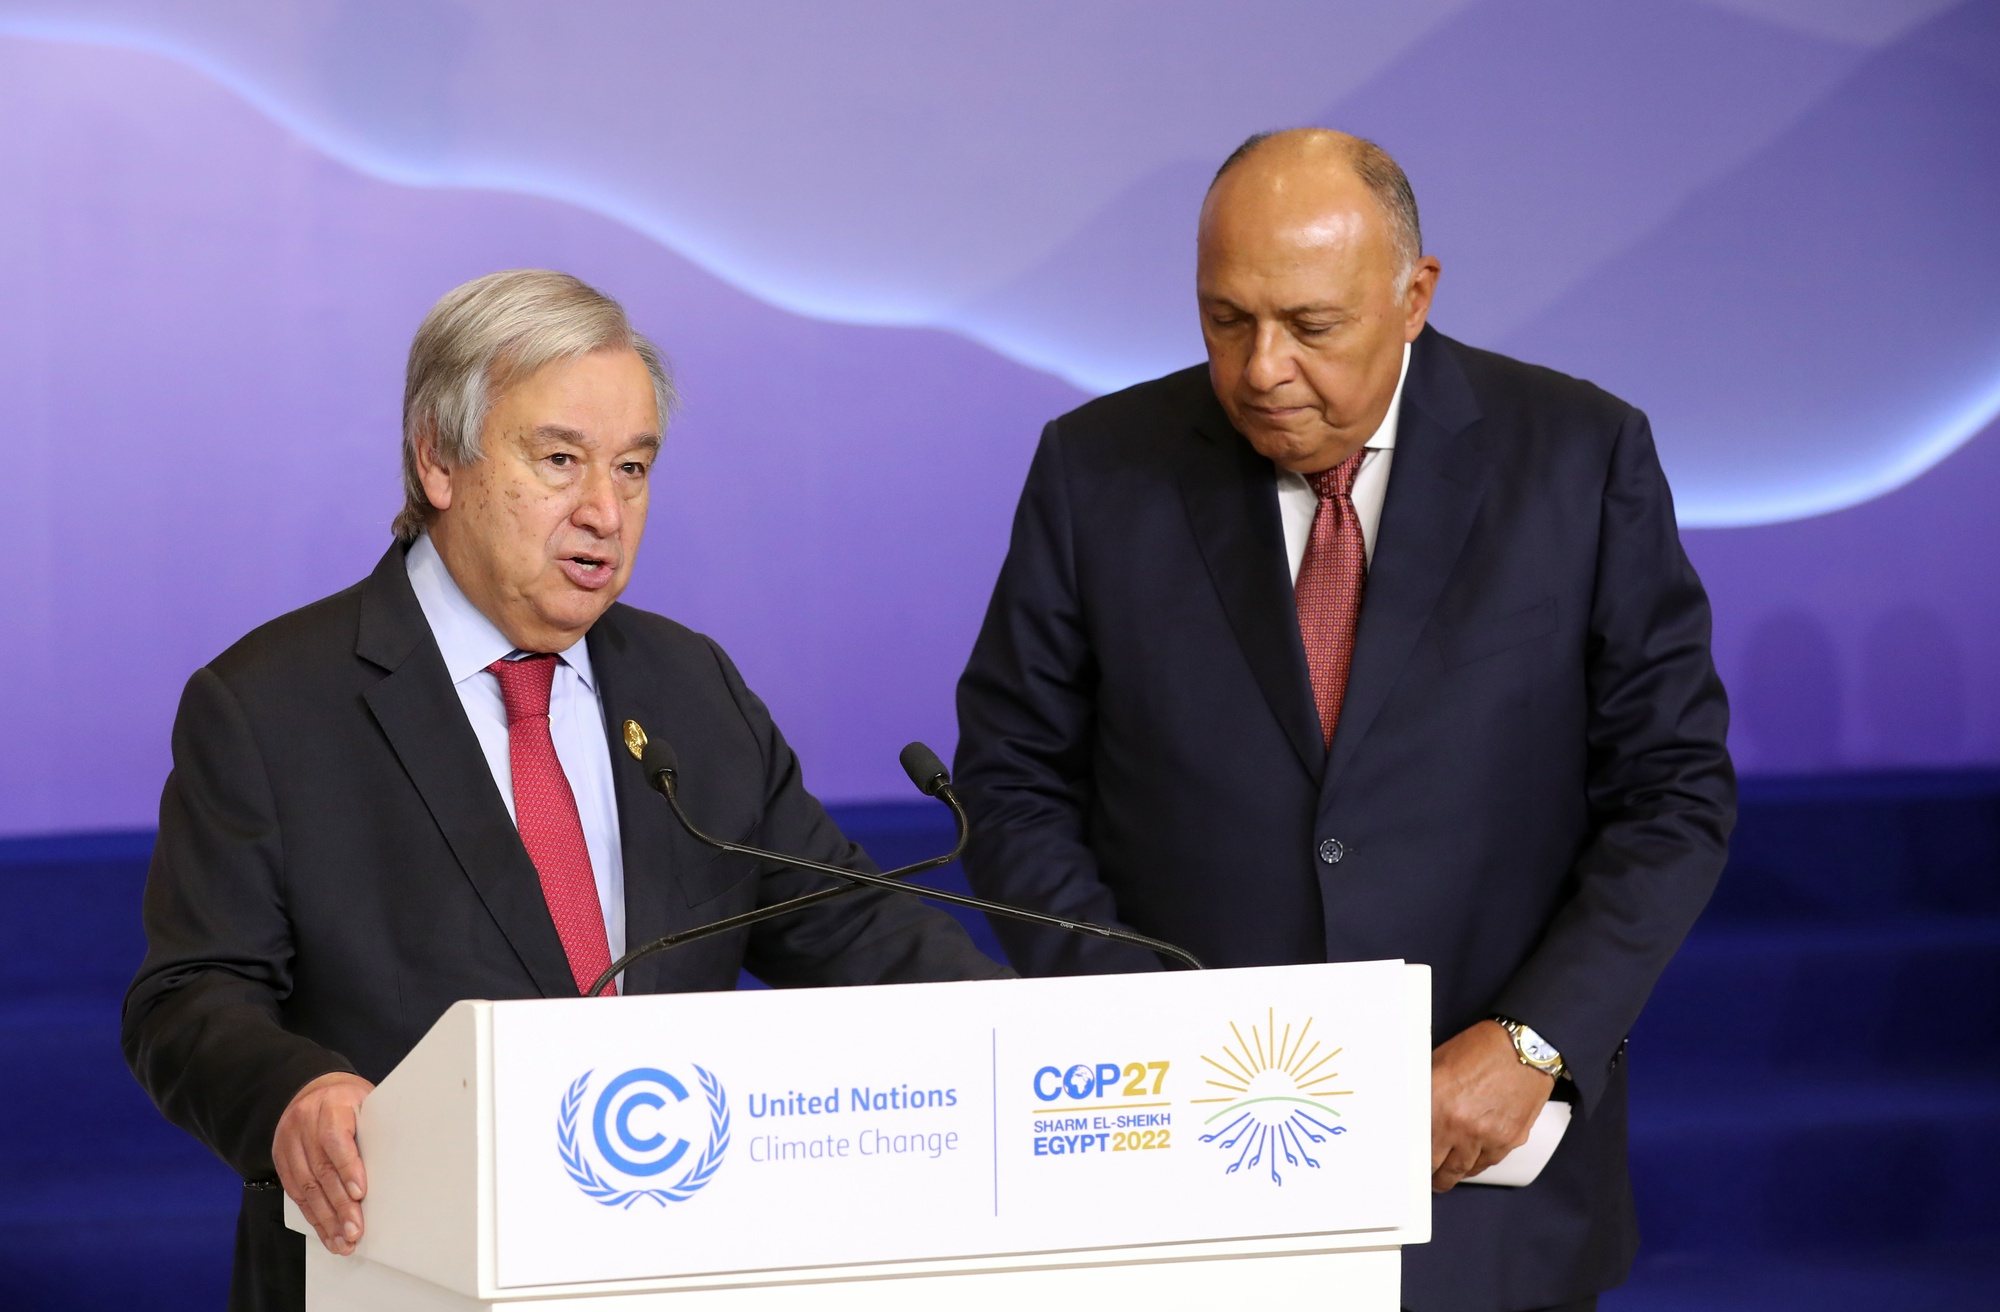 epa10310635 United Nations Secretary-General Antonio Guterres (L) speaks next to President of the COP27 climate summit Sameh Shoukry (R) during the COP27 UN Climate Summit in Sharm El-Sheikh, Egypt, 17 November 2022. The 2022 United Nations Climate Change Conference (COP27), runs from 06-18 November, and is expected to host one of the largest number of participants in the annual global climate conference as over 40,000 estimated attendees, including heads of states and governments, civil society, media and other relevant stakeholders will attend. The events will include a Climate Implementation Summit, thematic days, flagship initiatives, and Green Zone activities engaging with climate and other global challenges.  EPA/KHALED ELFIQI